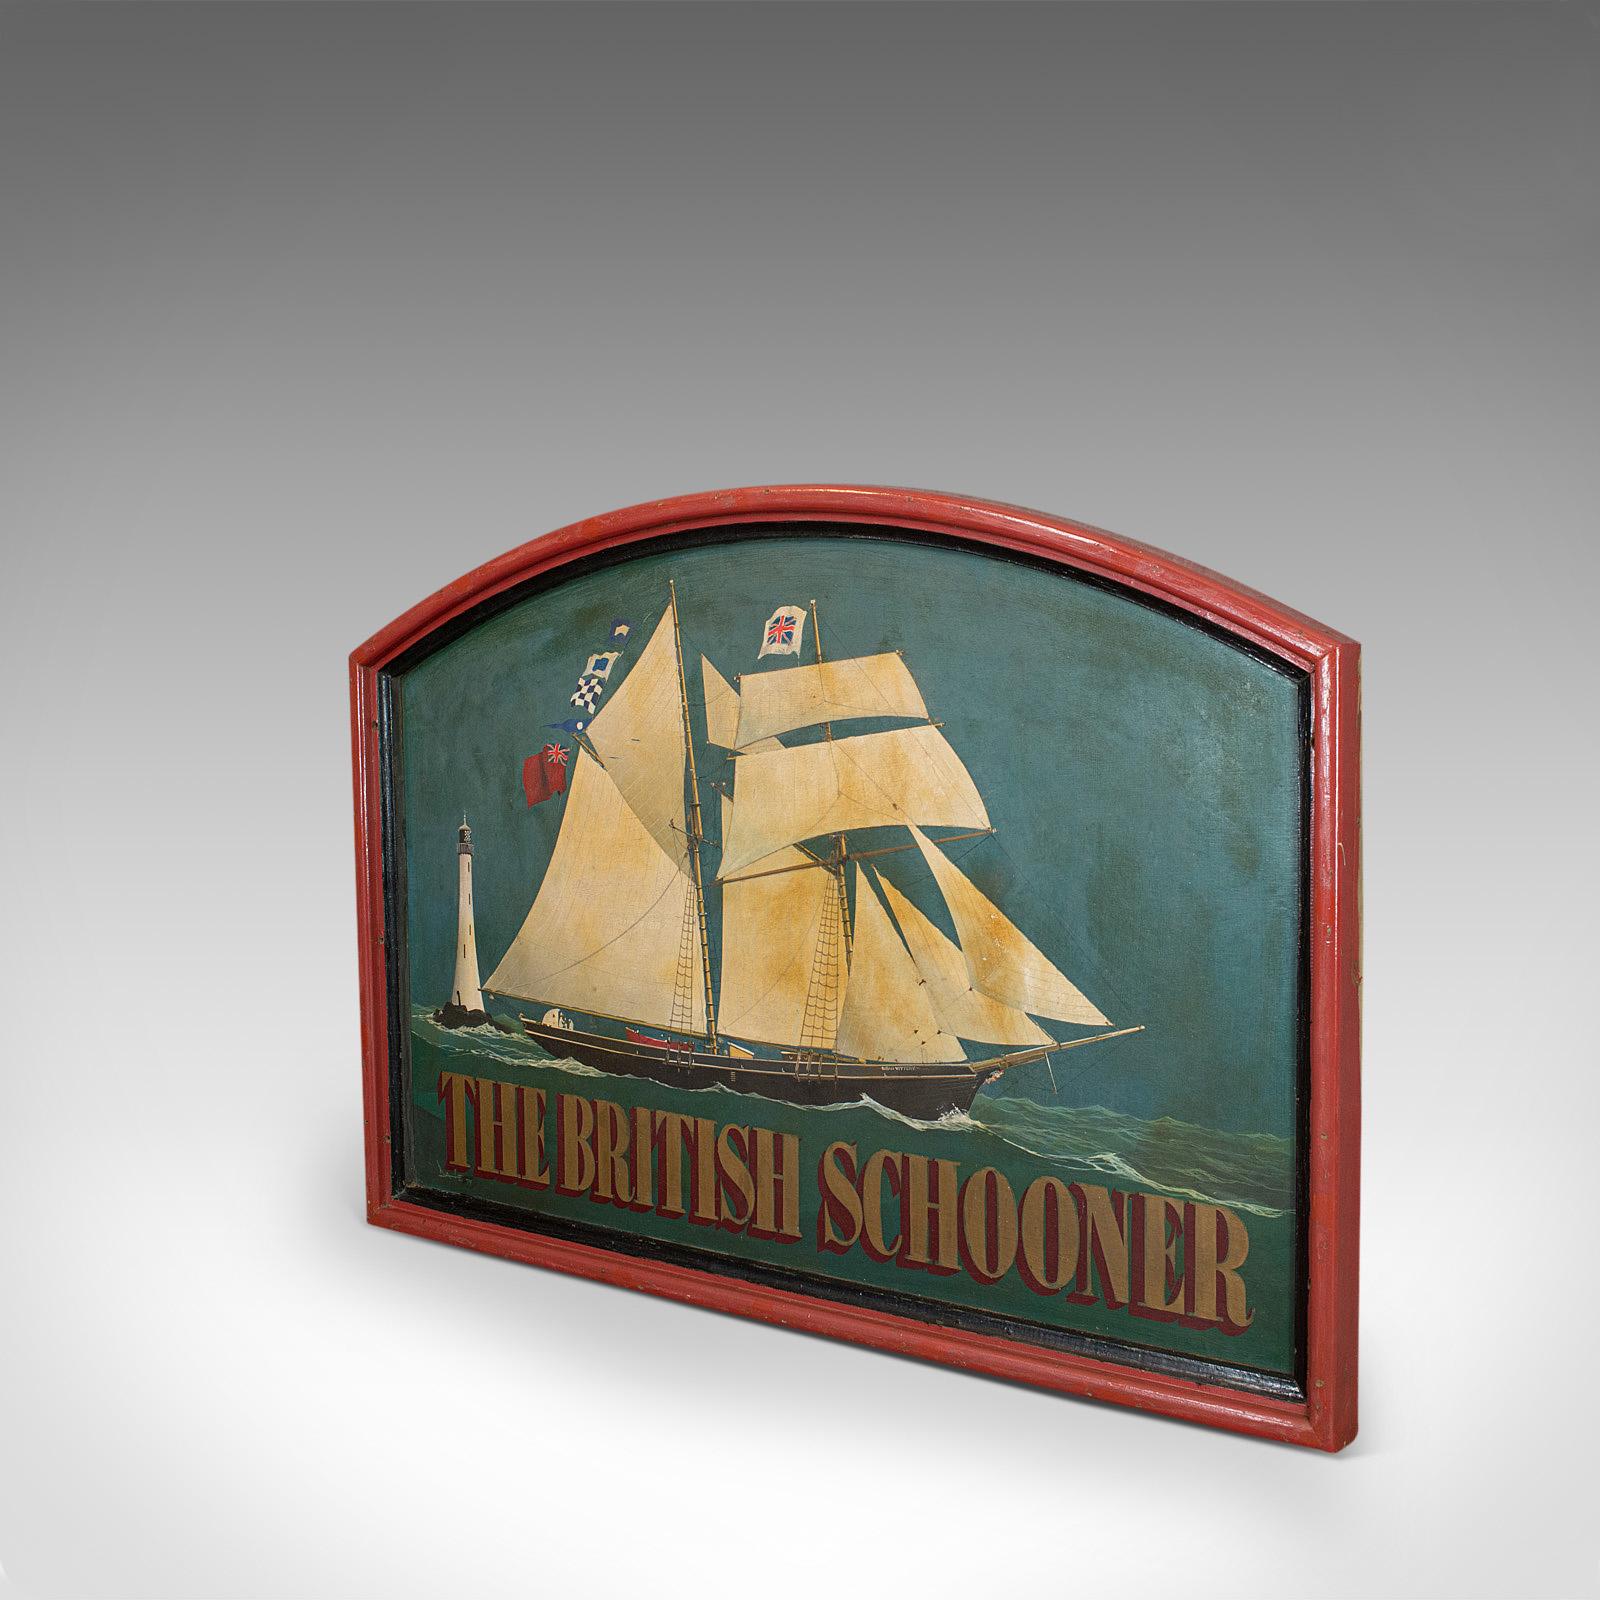 This is a large vintage ship pub sign – The British Schooner. An English, pine bar billboard with maritime theme and dating to the mid-20th century, circa 1950.

Impressive scale and nicely decorated
Displays a desirable aged patina
Hand painted